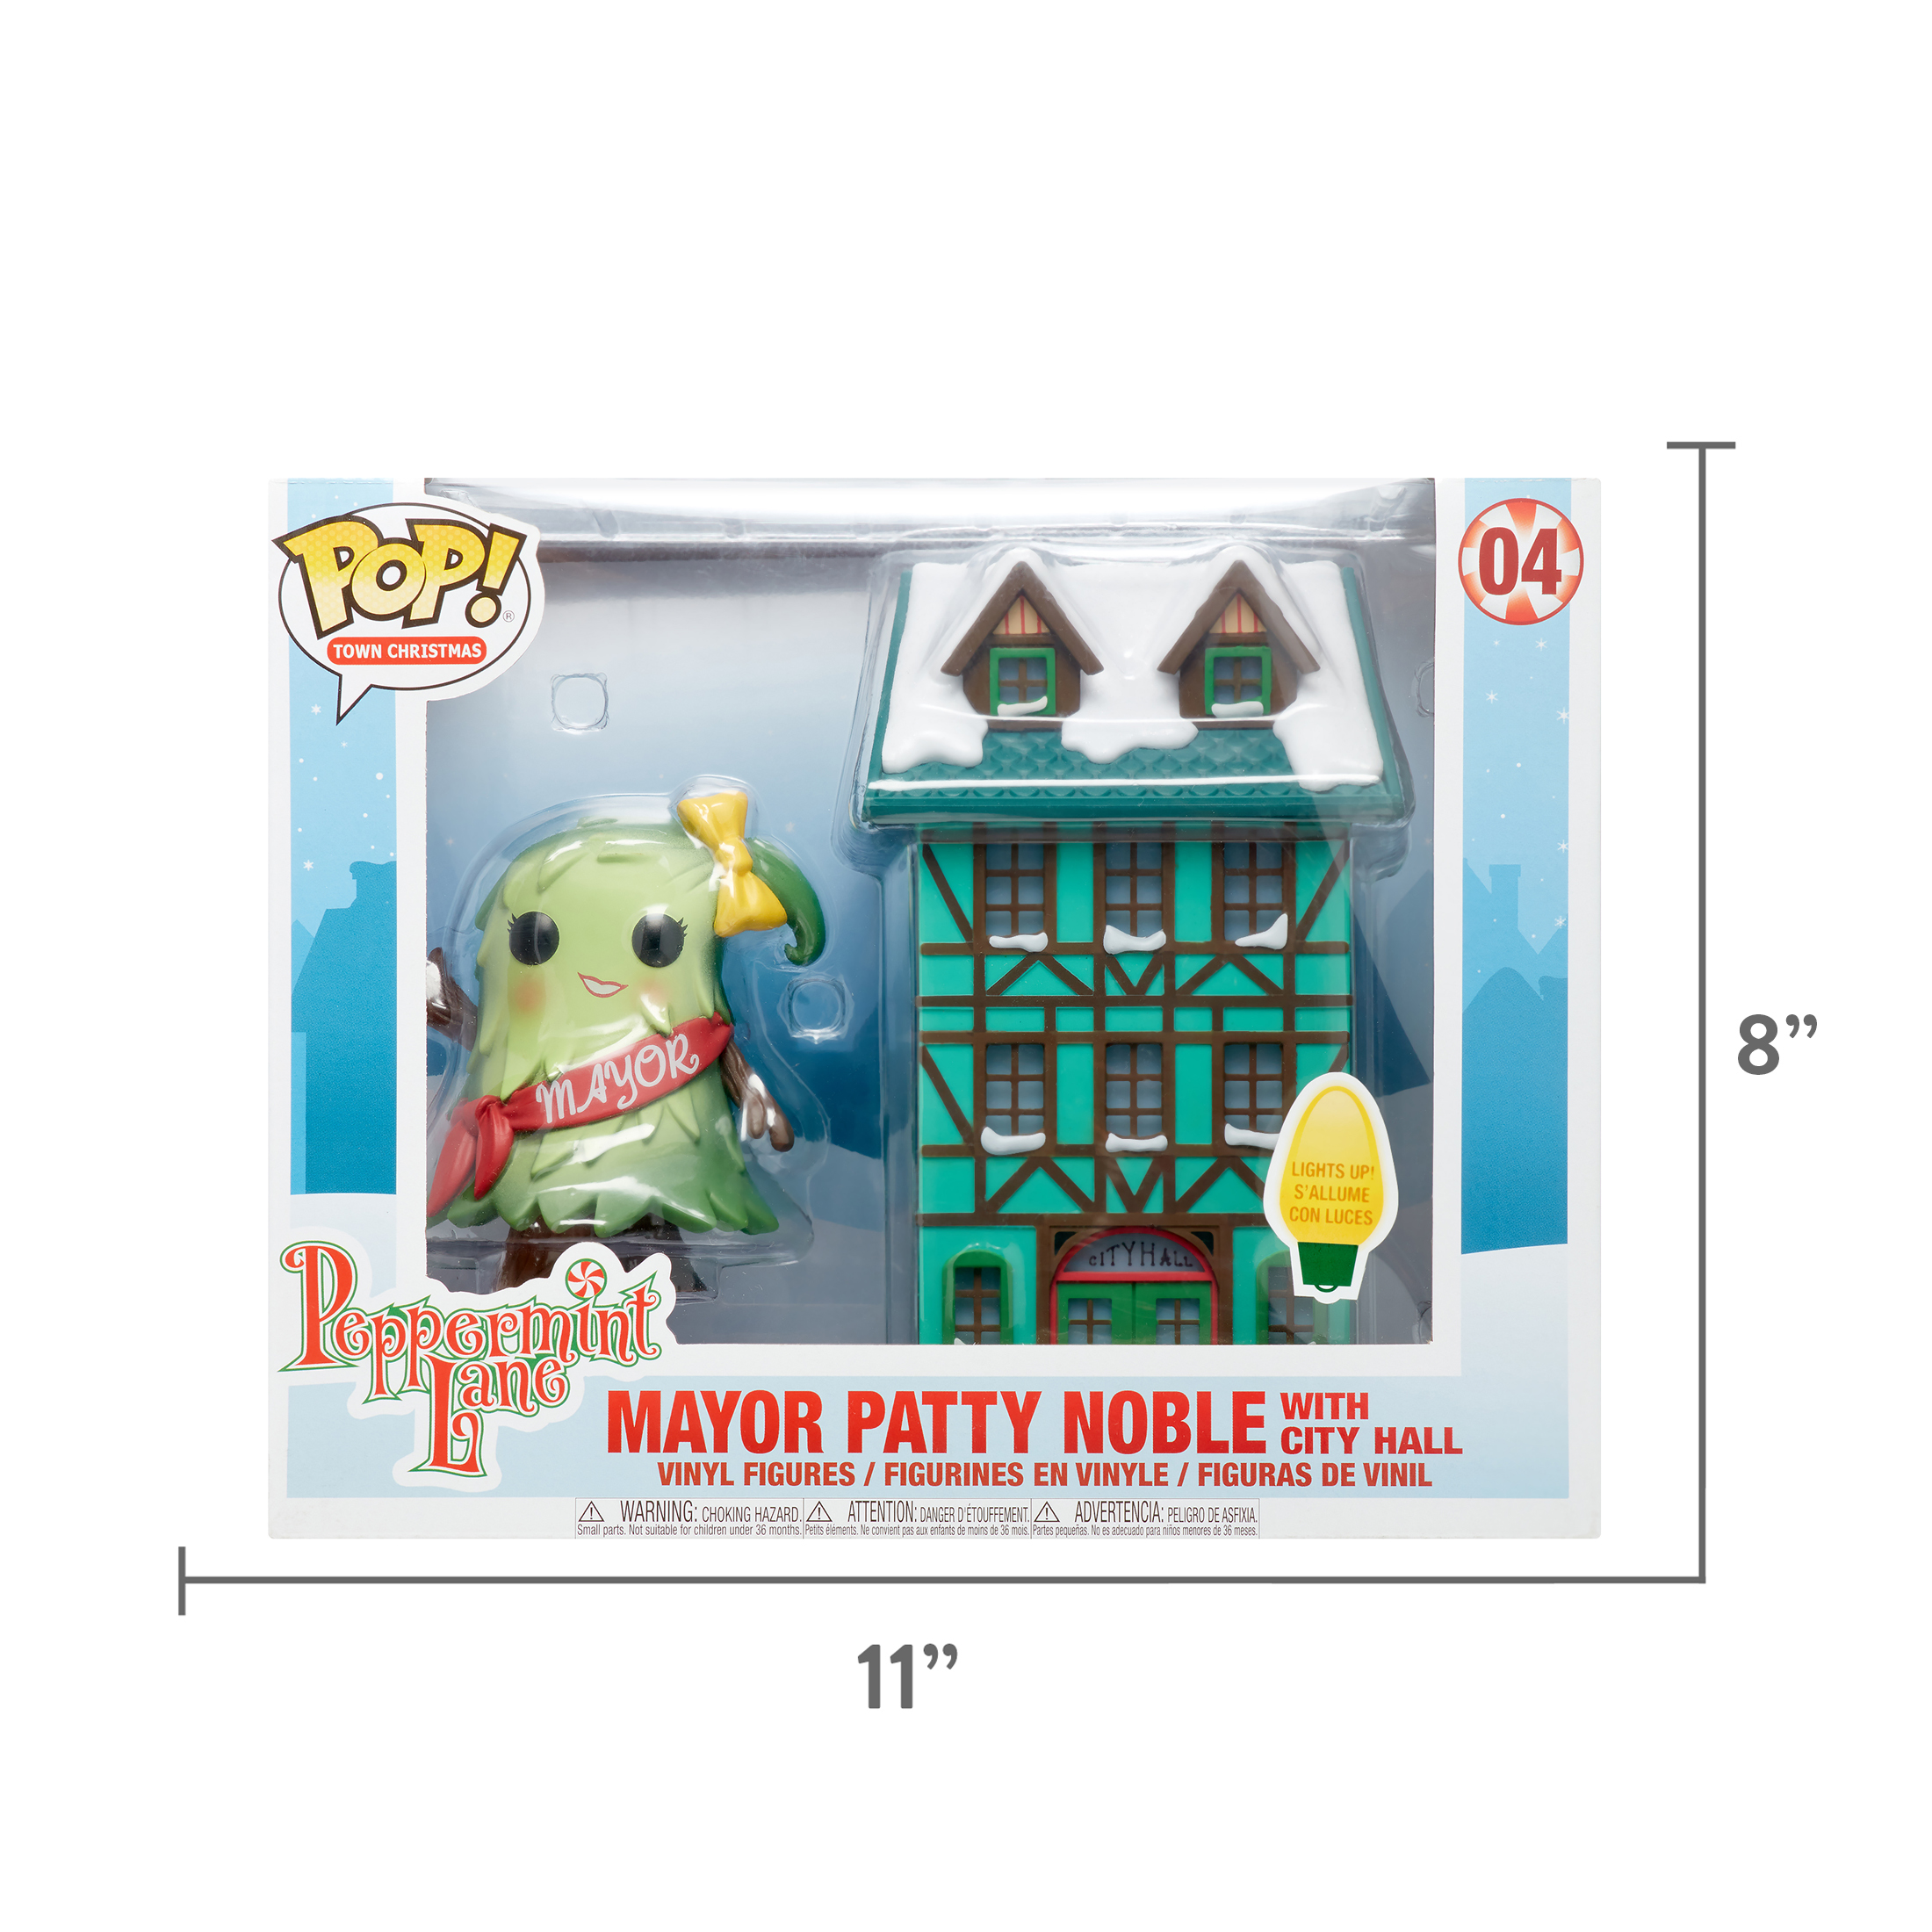 Funko POP! Town: Holiday - Town Hall w/ Mayor Patty Noble - image 2 of 8